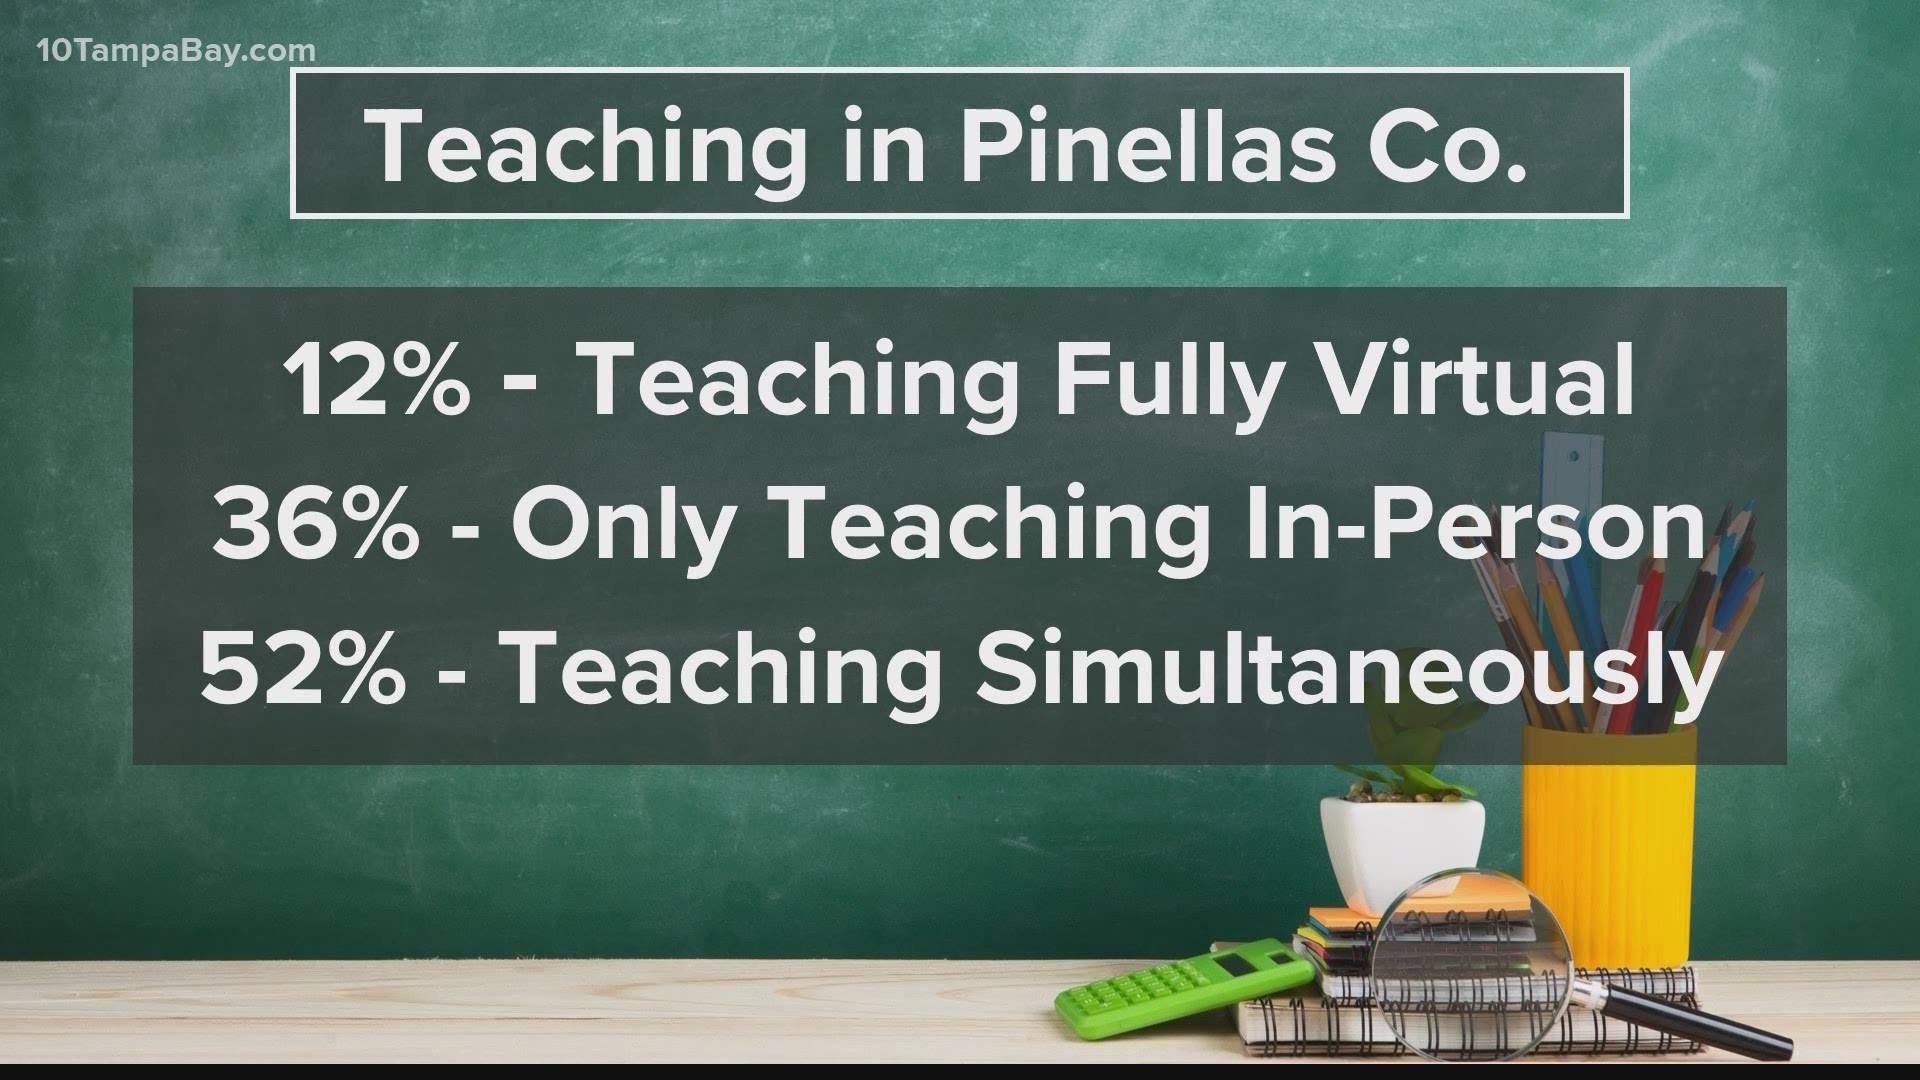 Some Pinellas County teachers say they cannot continue to feasibly teach both in-person and virtual classrooms at the same time.